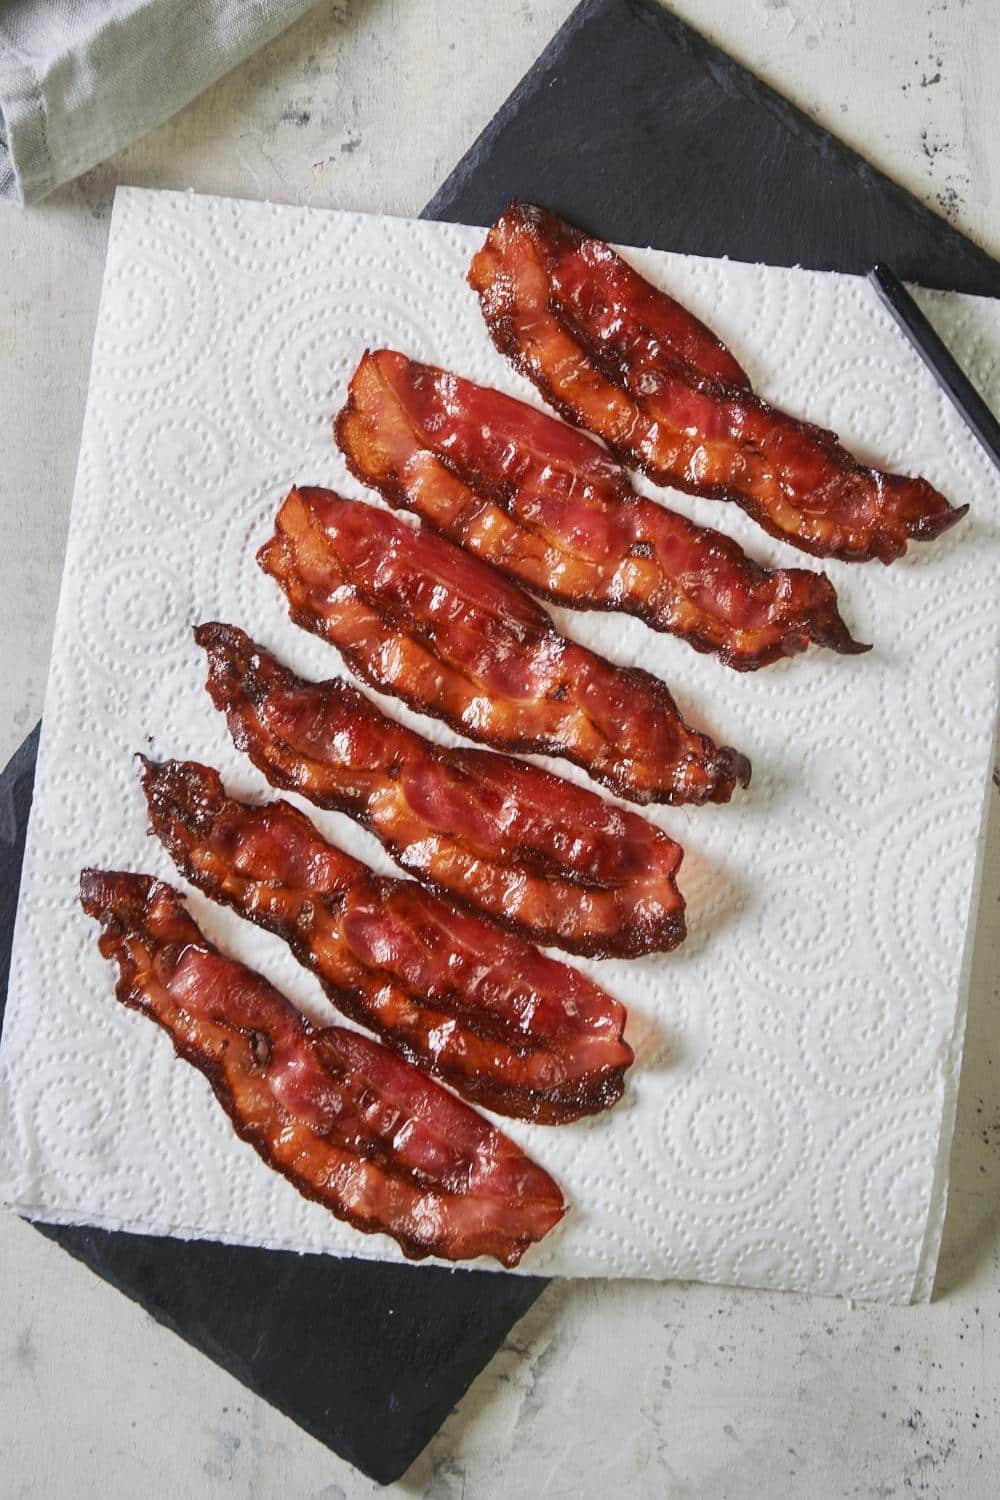 How To Cook Turkey Bacon In The Oven PERFECT Every Time